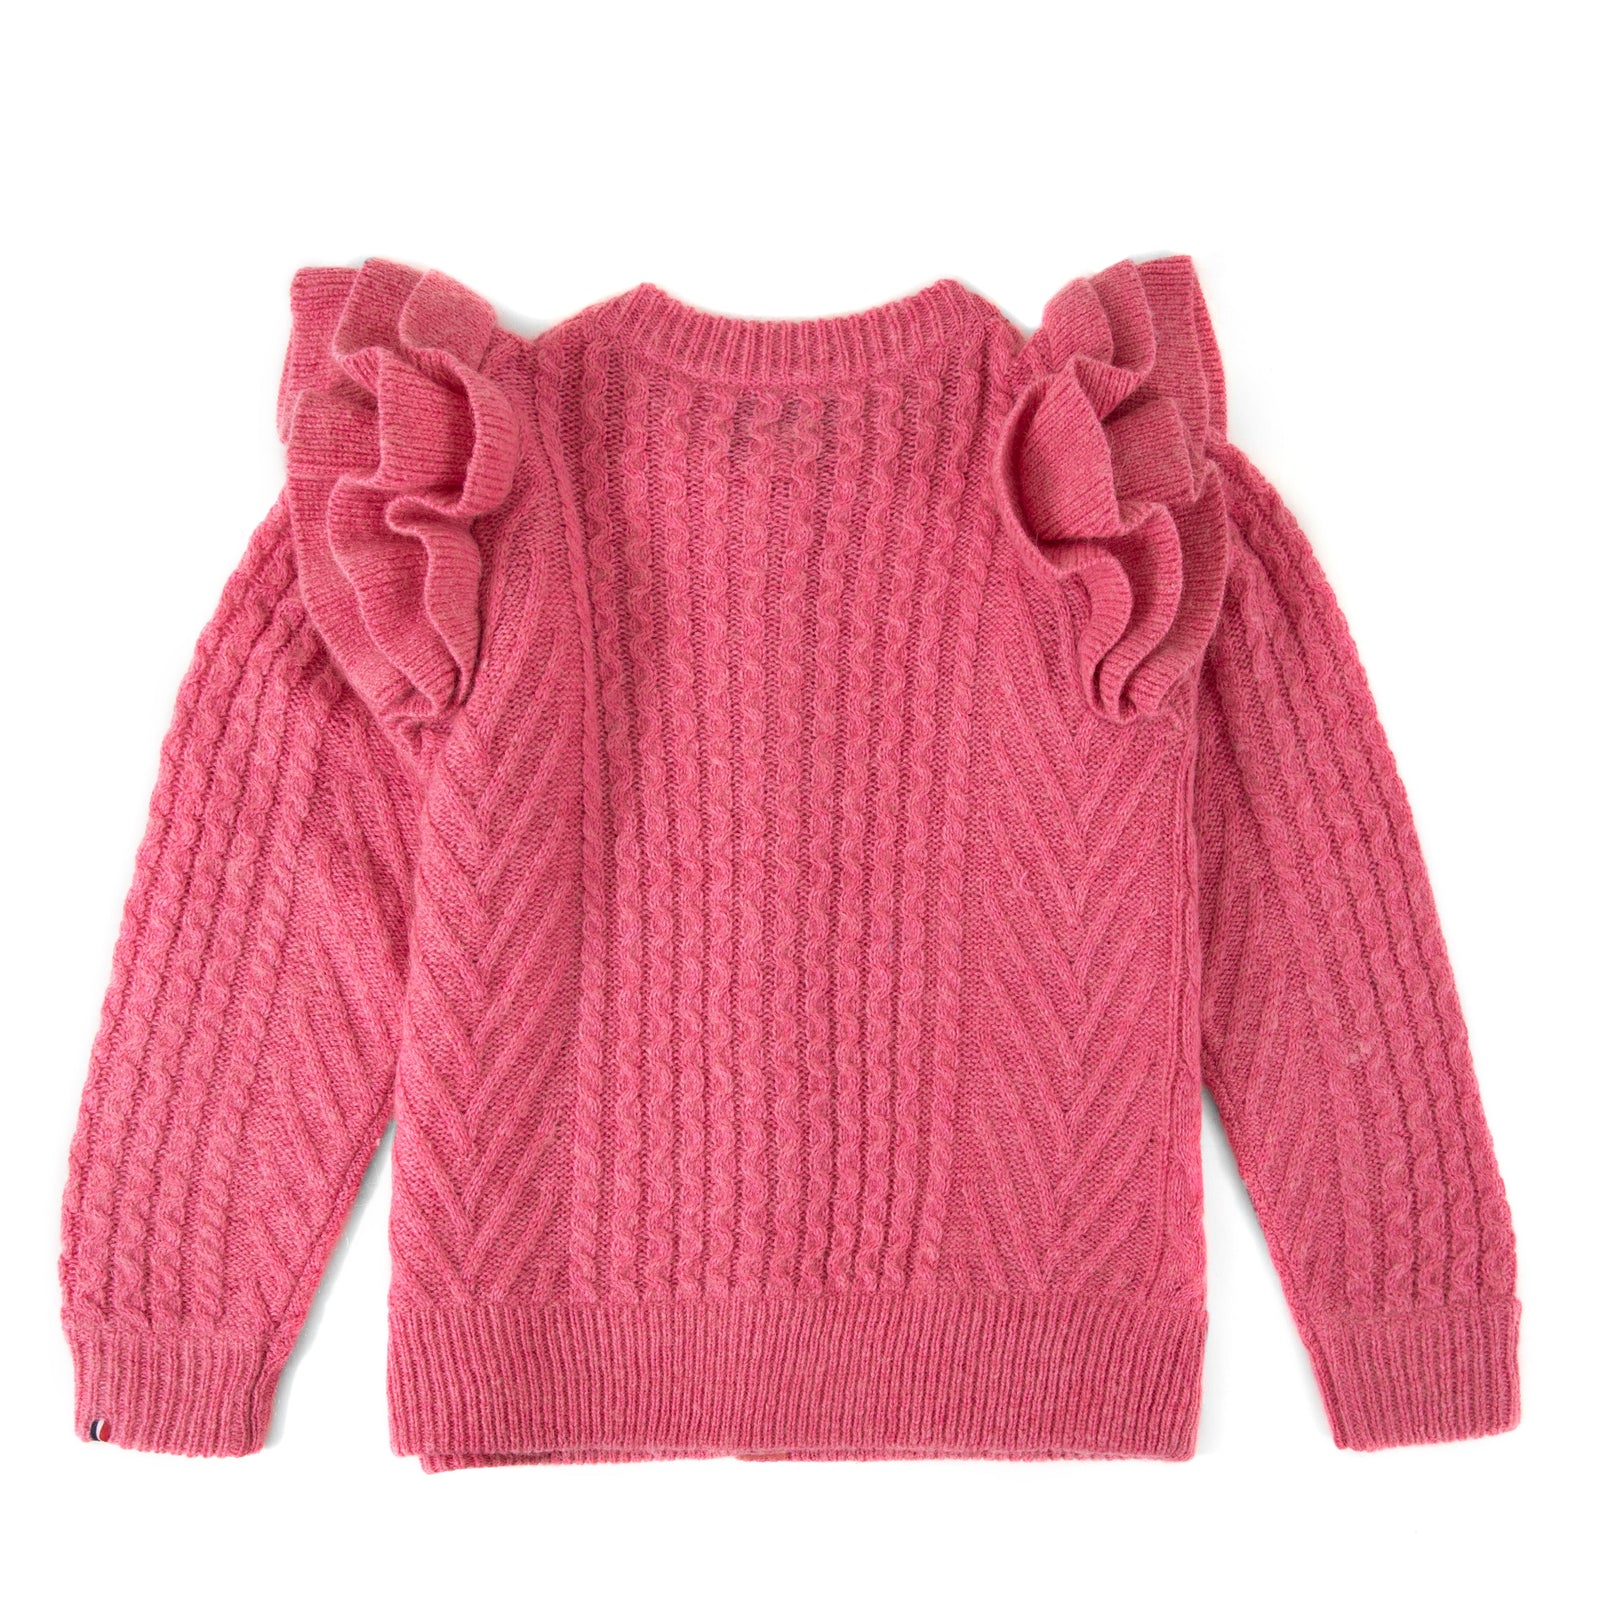 Clare V. x DEMYLEE Pink Nora Cardigan with Ruffles - Back